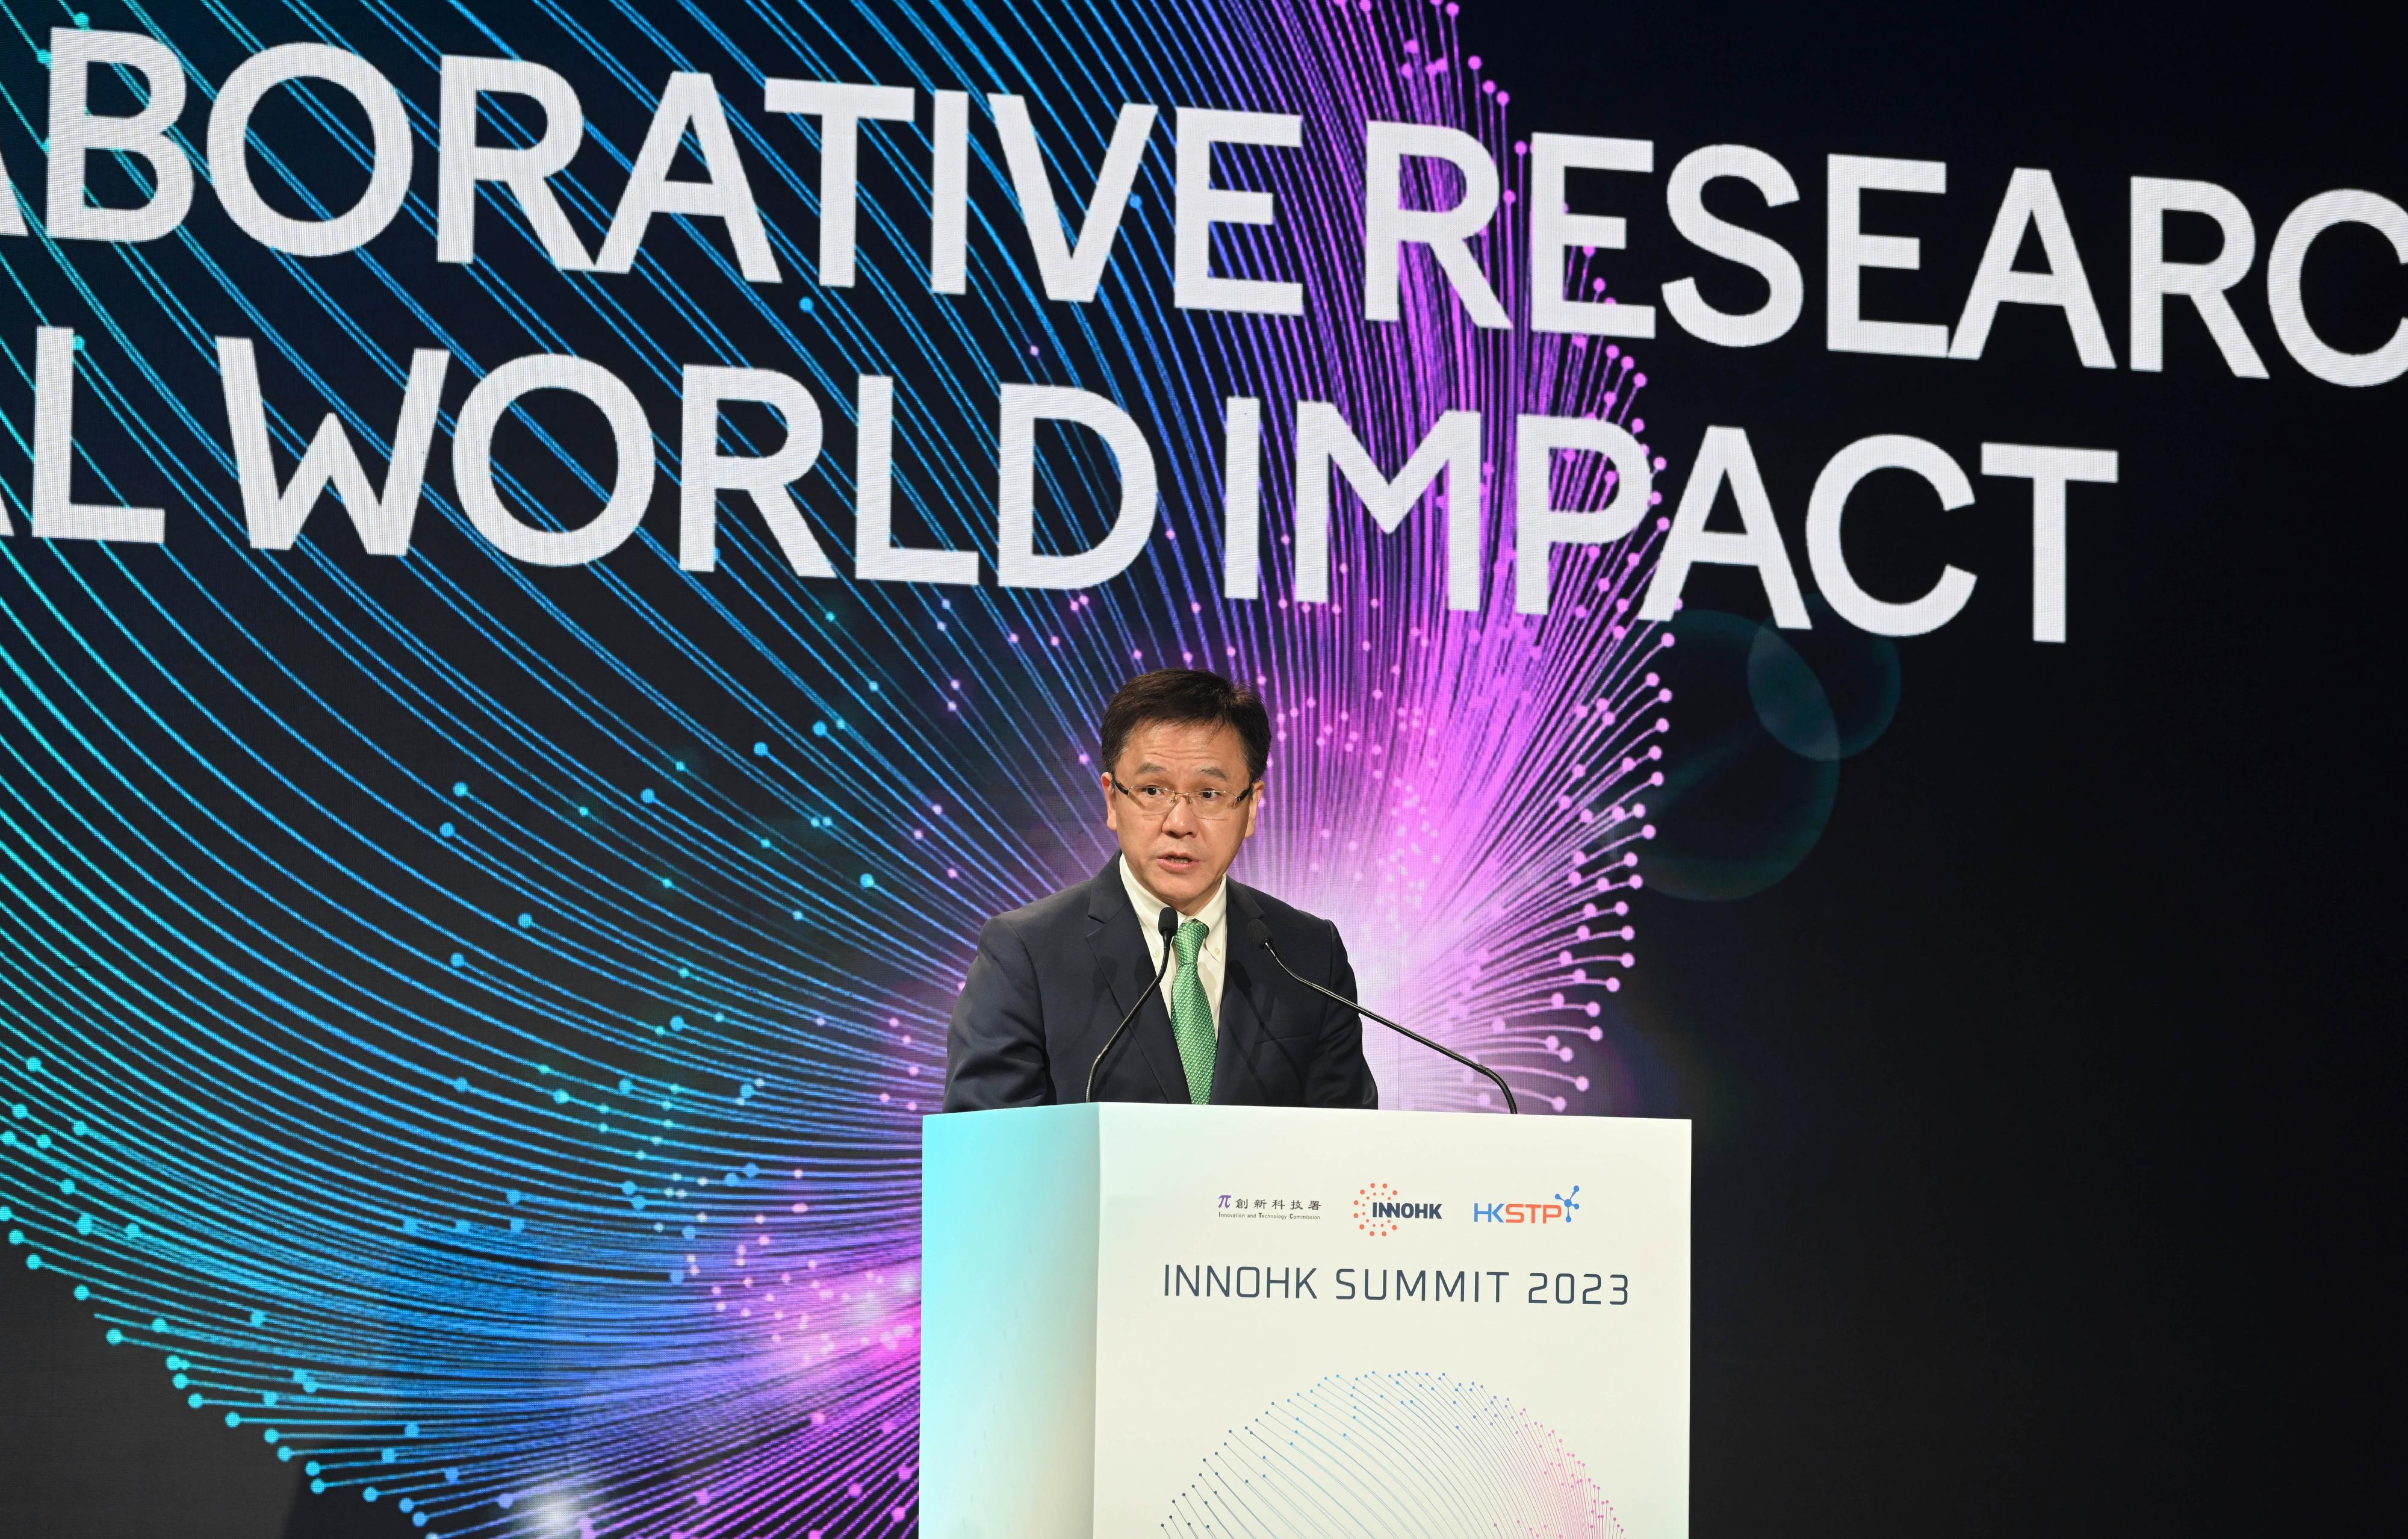 Organised by the Innovation and Technology Commission and the Hong Kong Science and Technology Parks Corporation, the InnoHK Summit 2023 was held in Hong Kong Science Park today (December 6). Photo shows the Secretary for Innovation, Technology and Industry, Professor Sun Dong, delivering a speech at the opening ceremony.